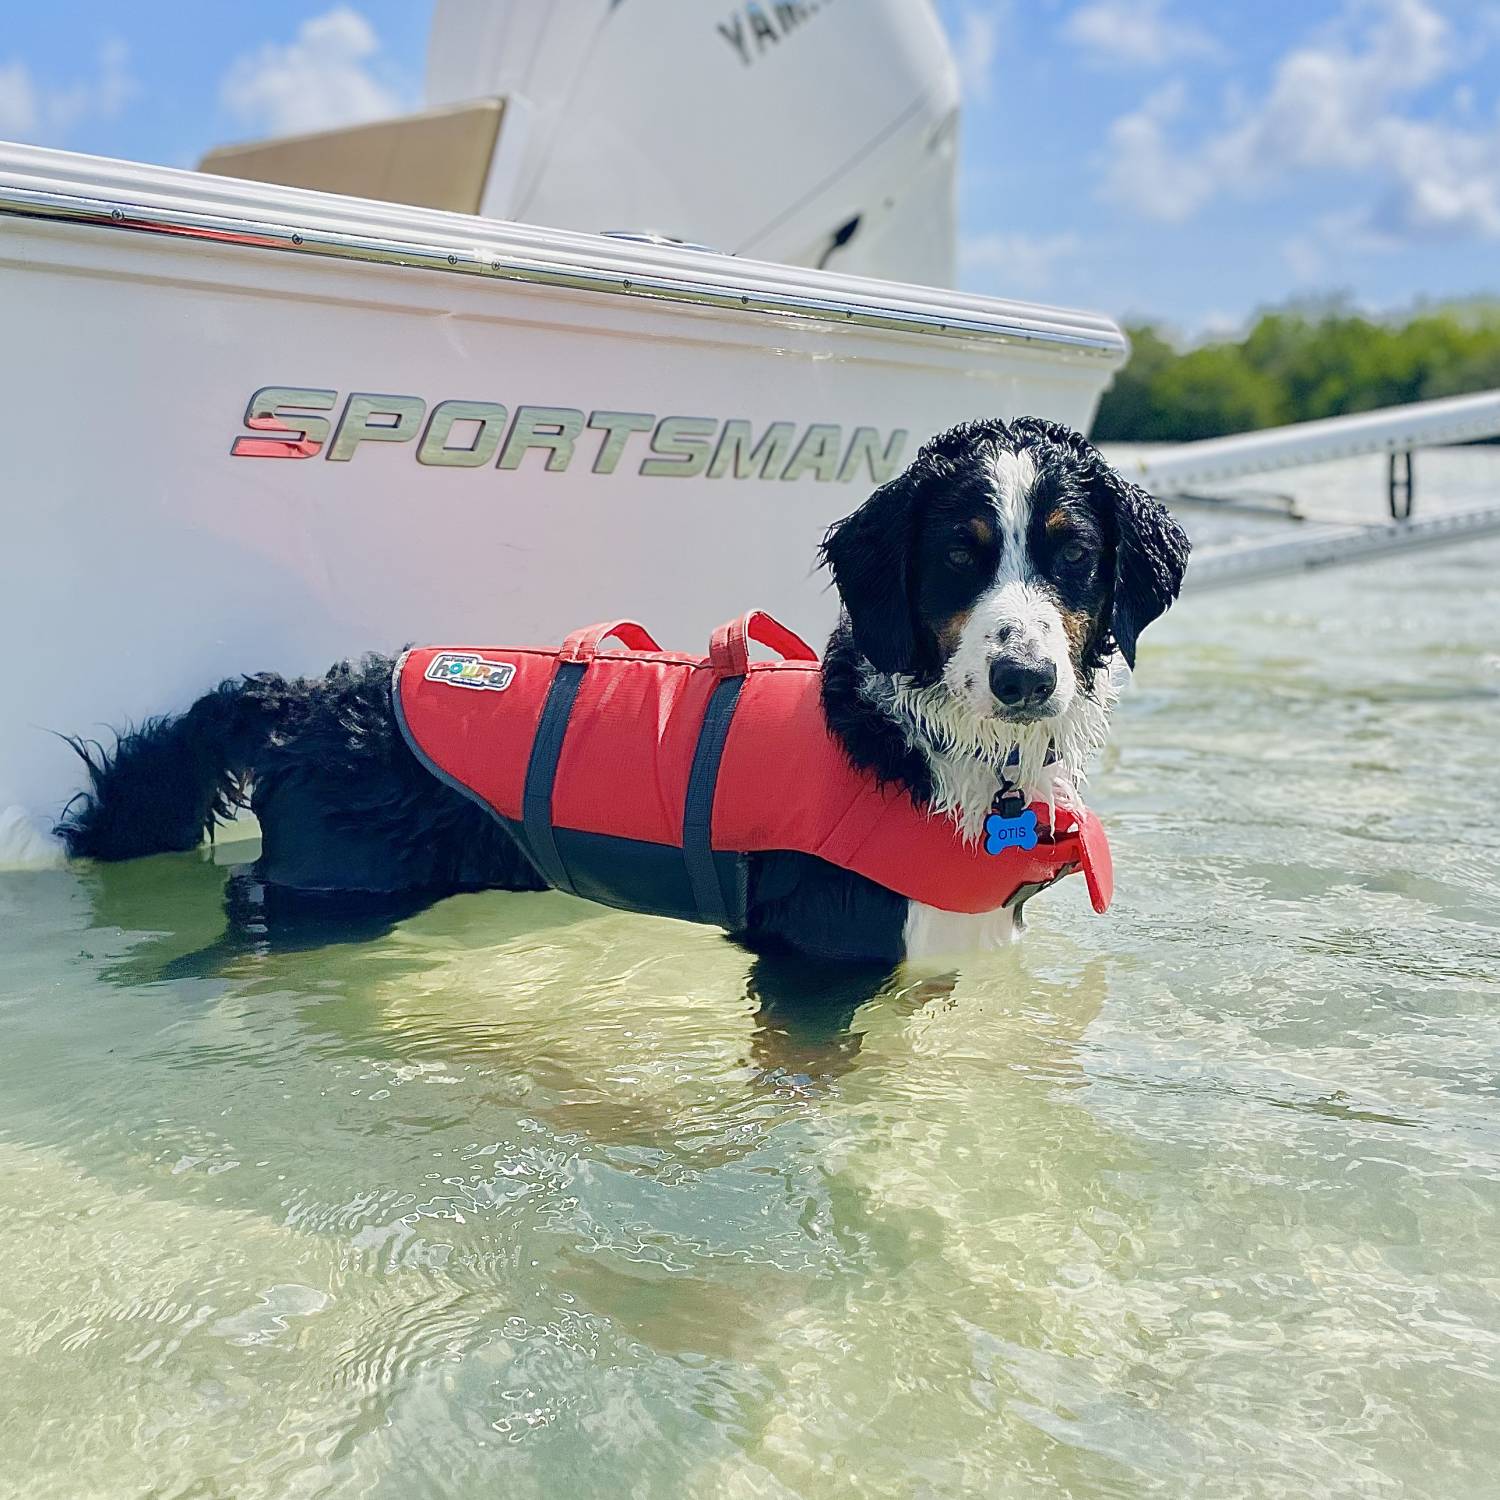 Otis cooling off at the sandbar while keeping an eye on his big brother.